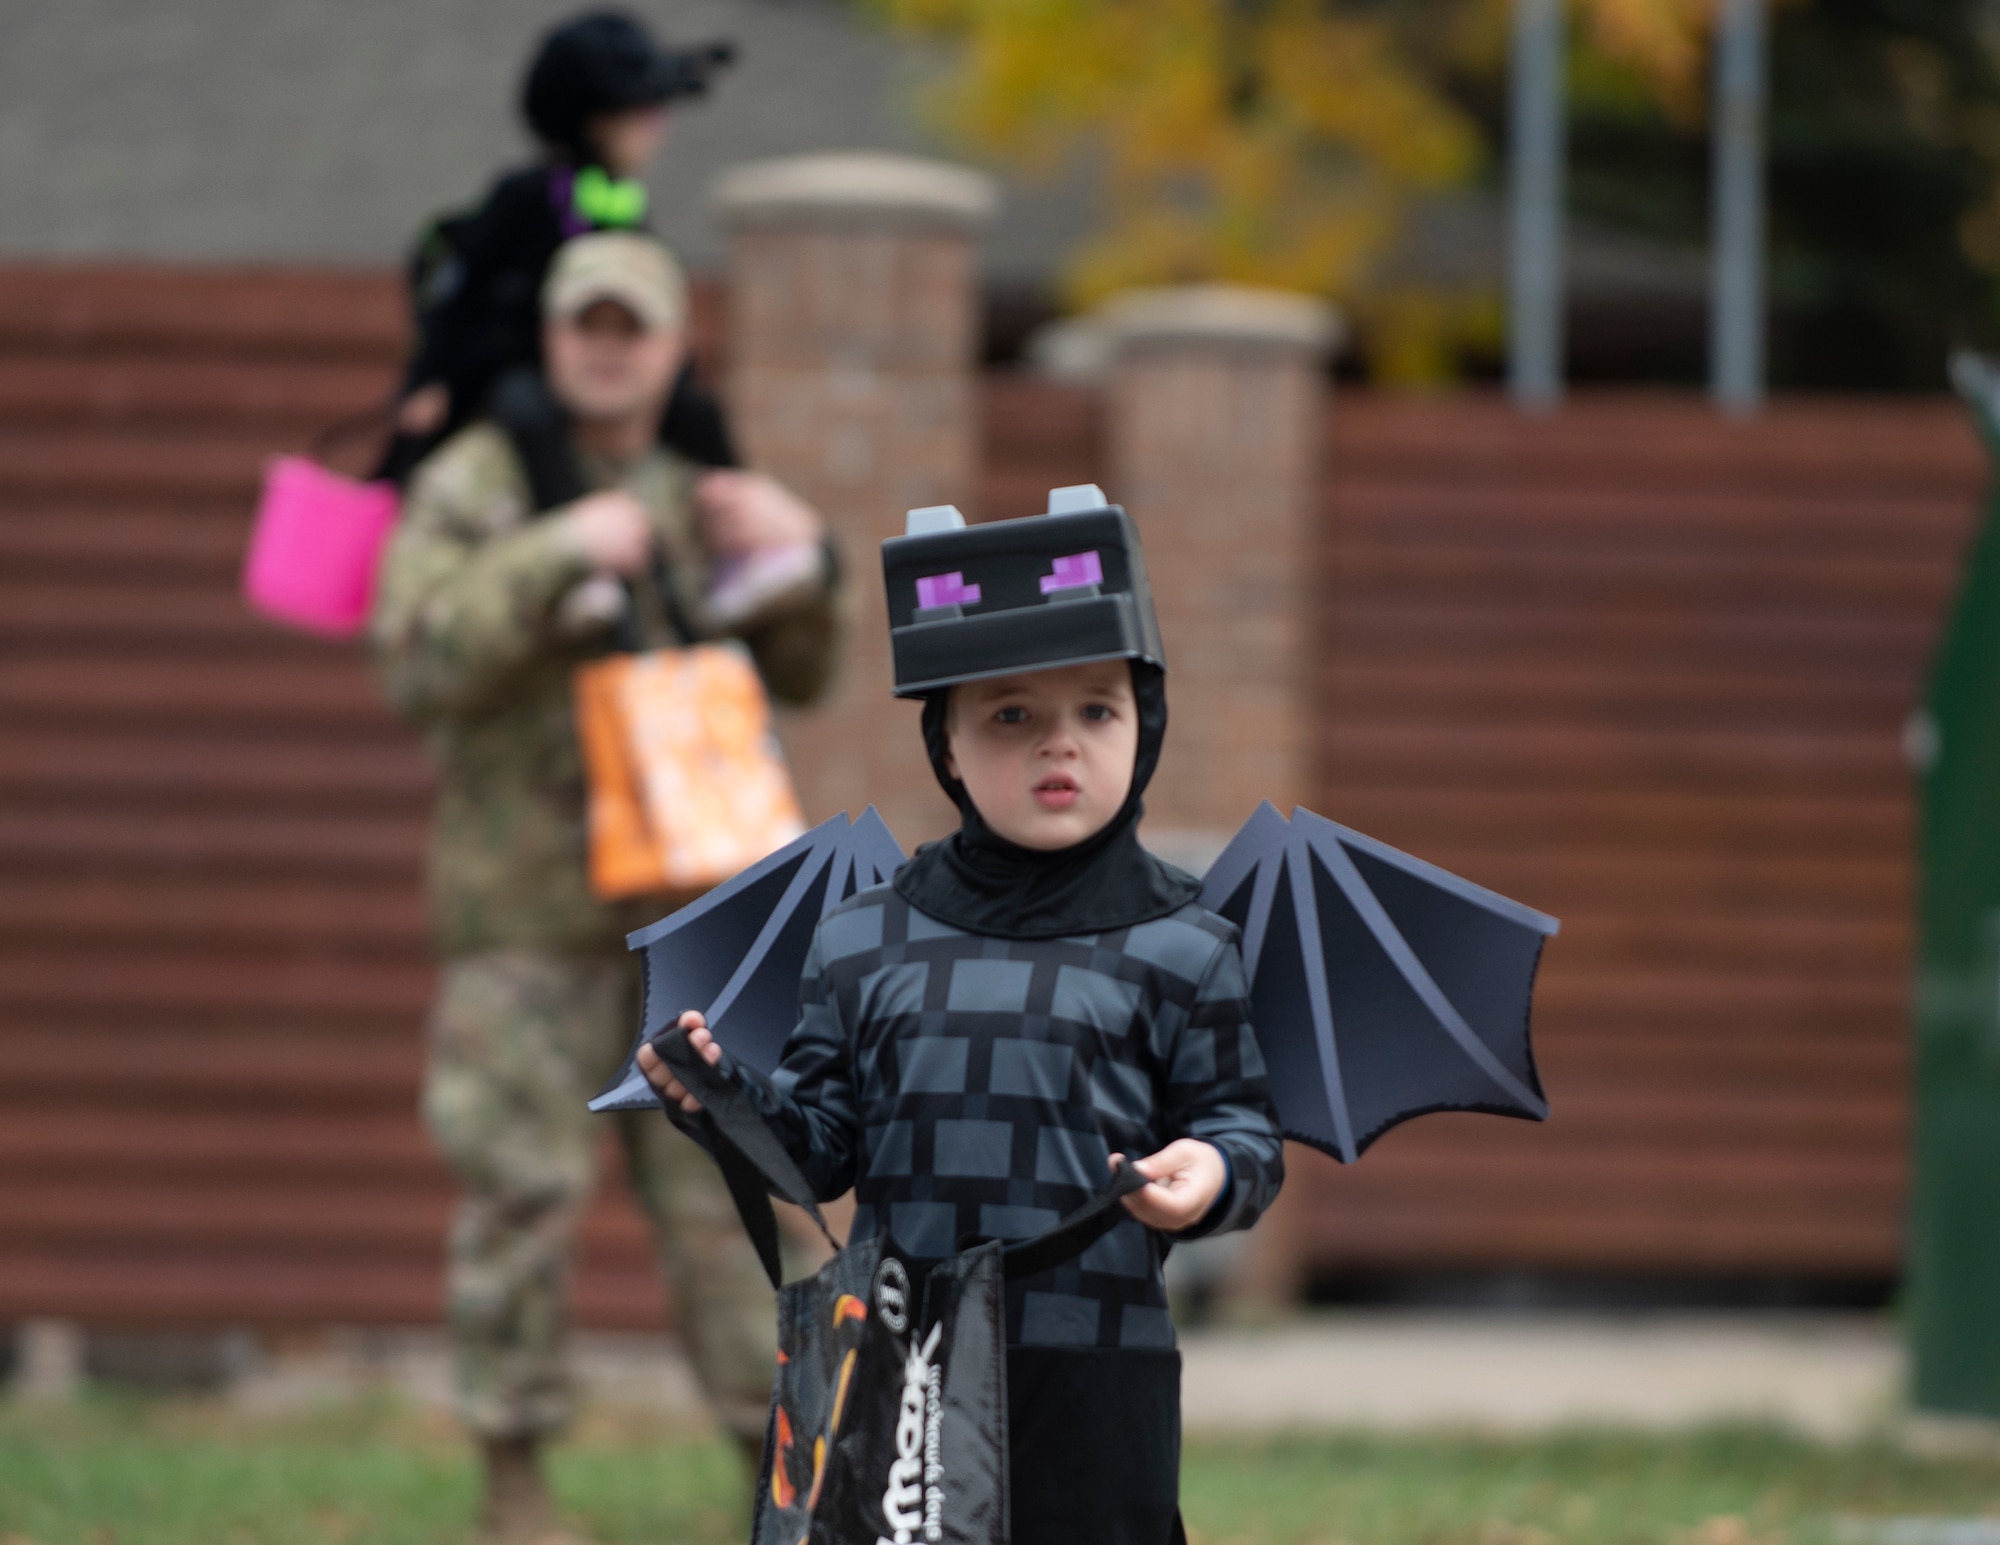 U.S. Air Force Airmen from the 133rd Airlift Wing handed out candy during a Halloween parade in St. Paul, Oct. 16, 2022.